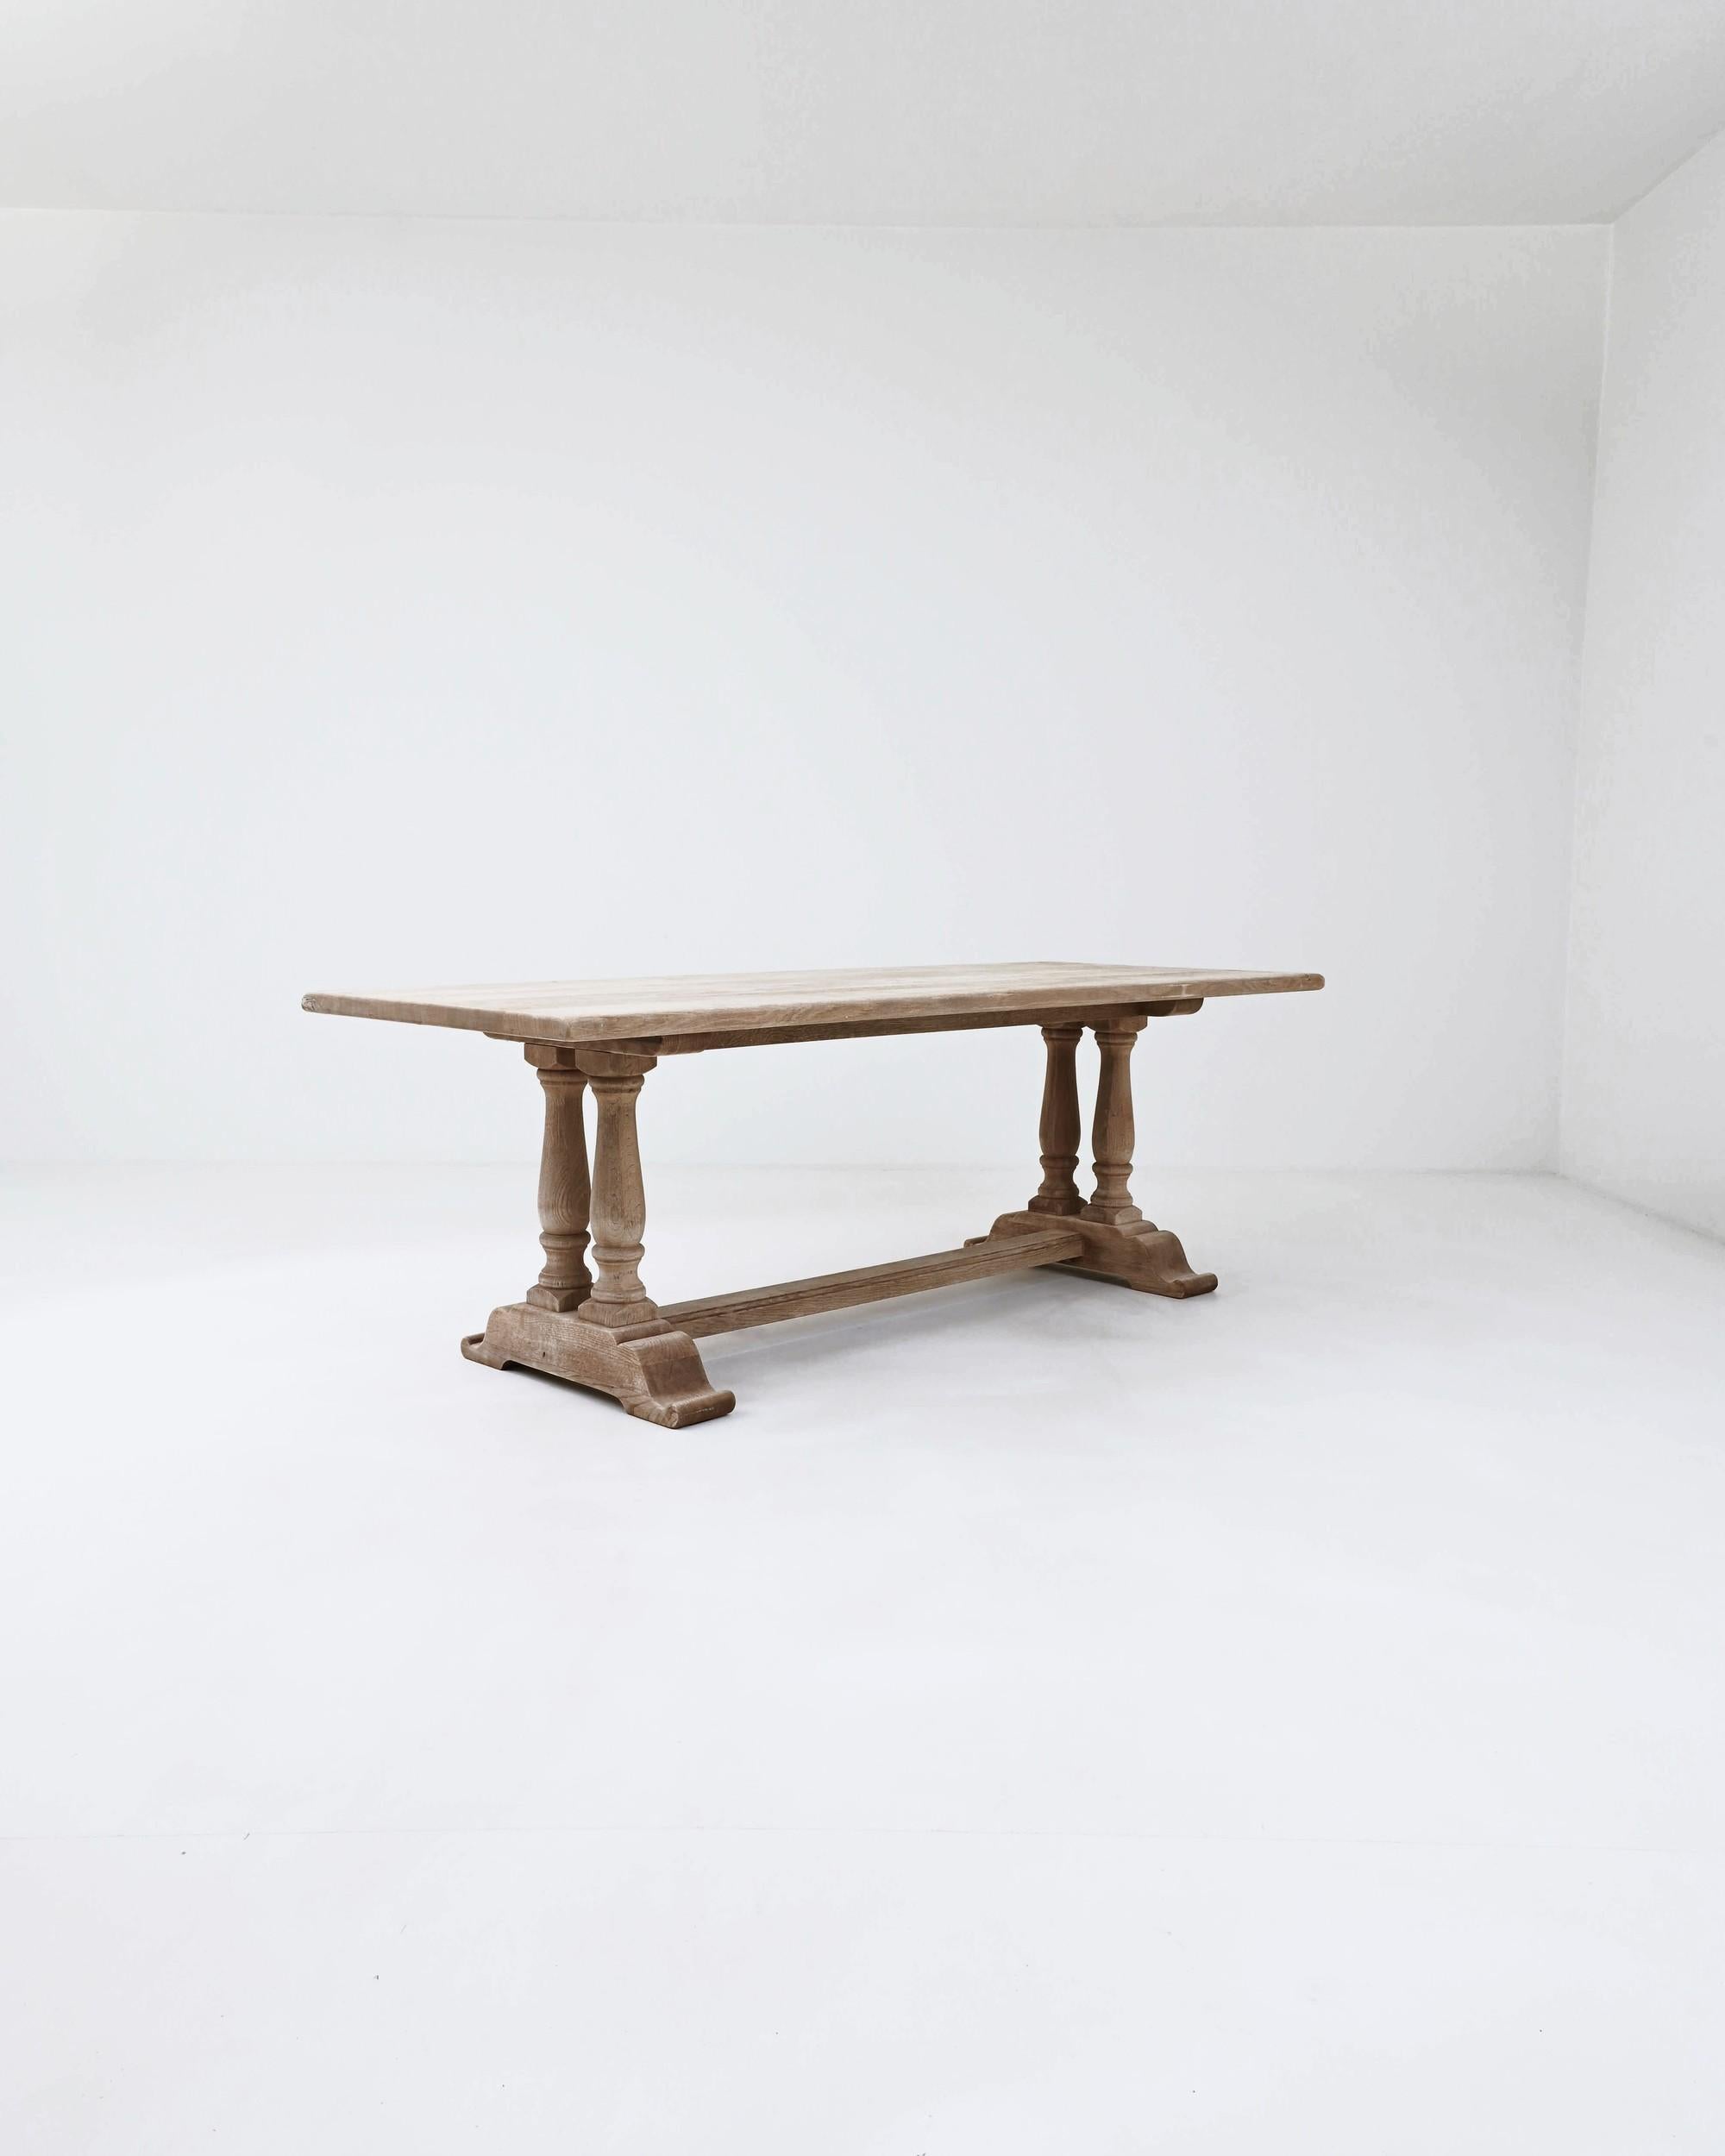 This vintage oak dining table offers a beautiful Provincial centerpiece. Hand-built in Belgium in the 20th century, a simple rectangular tabletop sits atop a trestle base. The columns of the turned legs create an attractive profile, while the wide